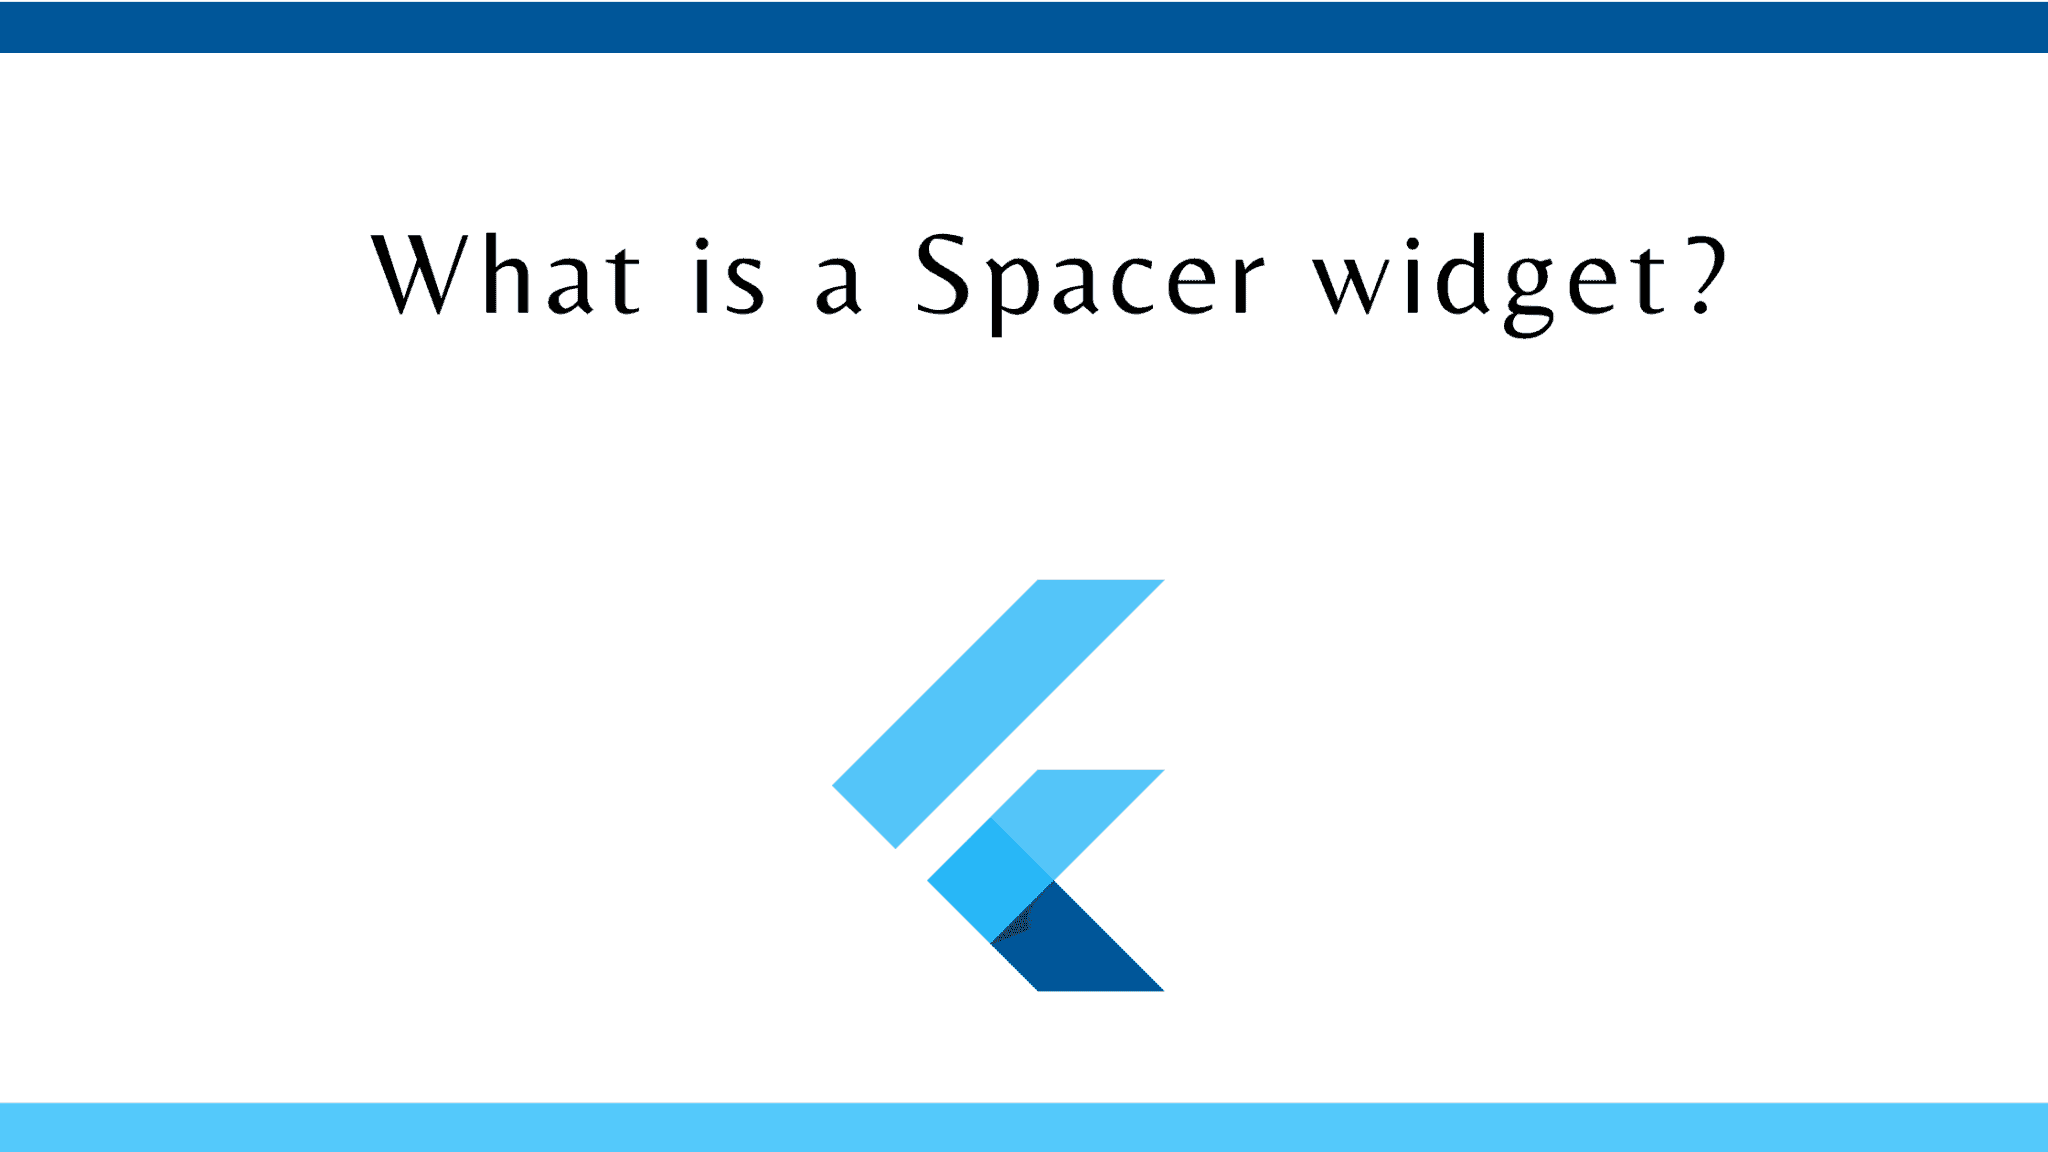 What is a Spacer widget?